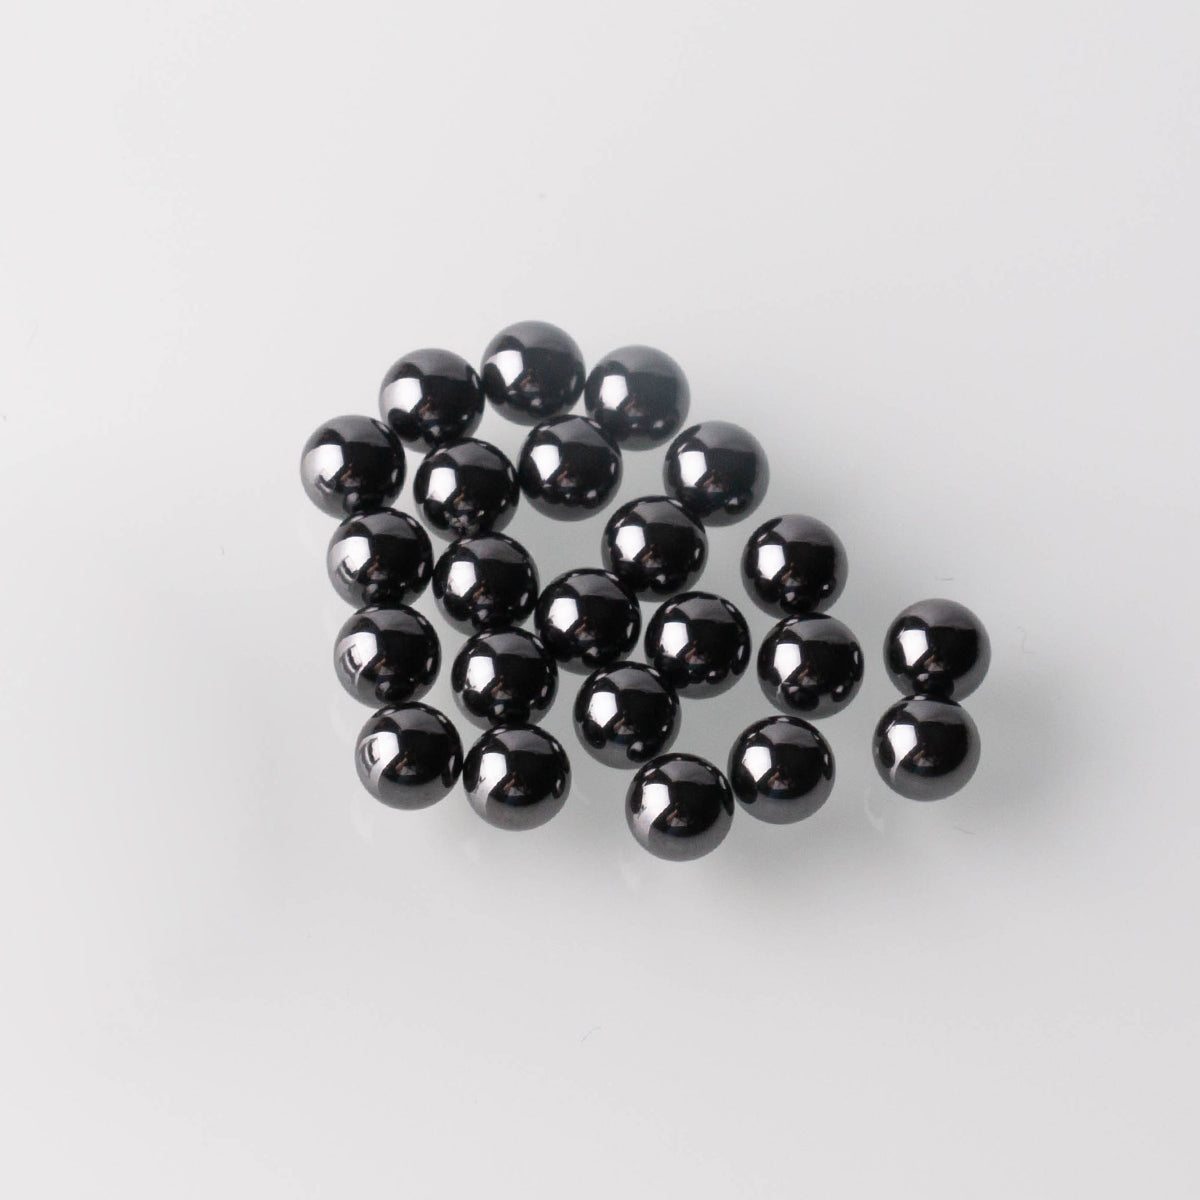 Volcanee 10pcs 5mm Silicon Carbide Sphere Black Sic Ball Terp Pearl